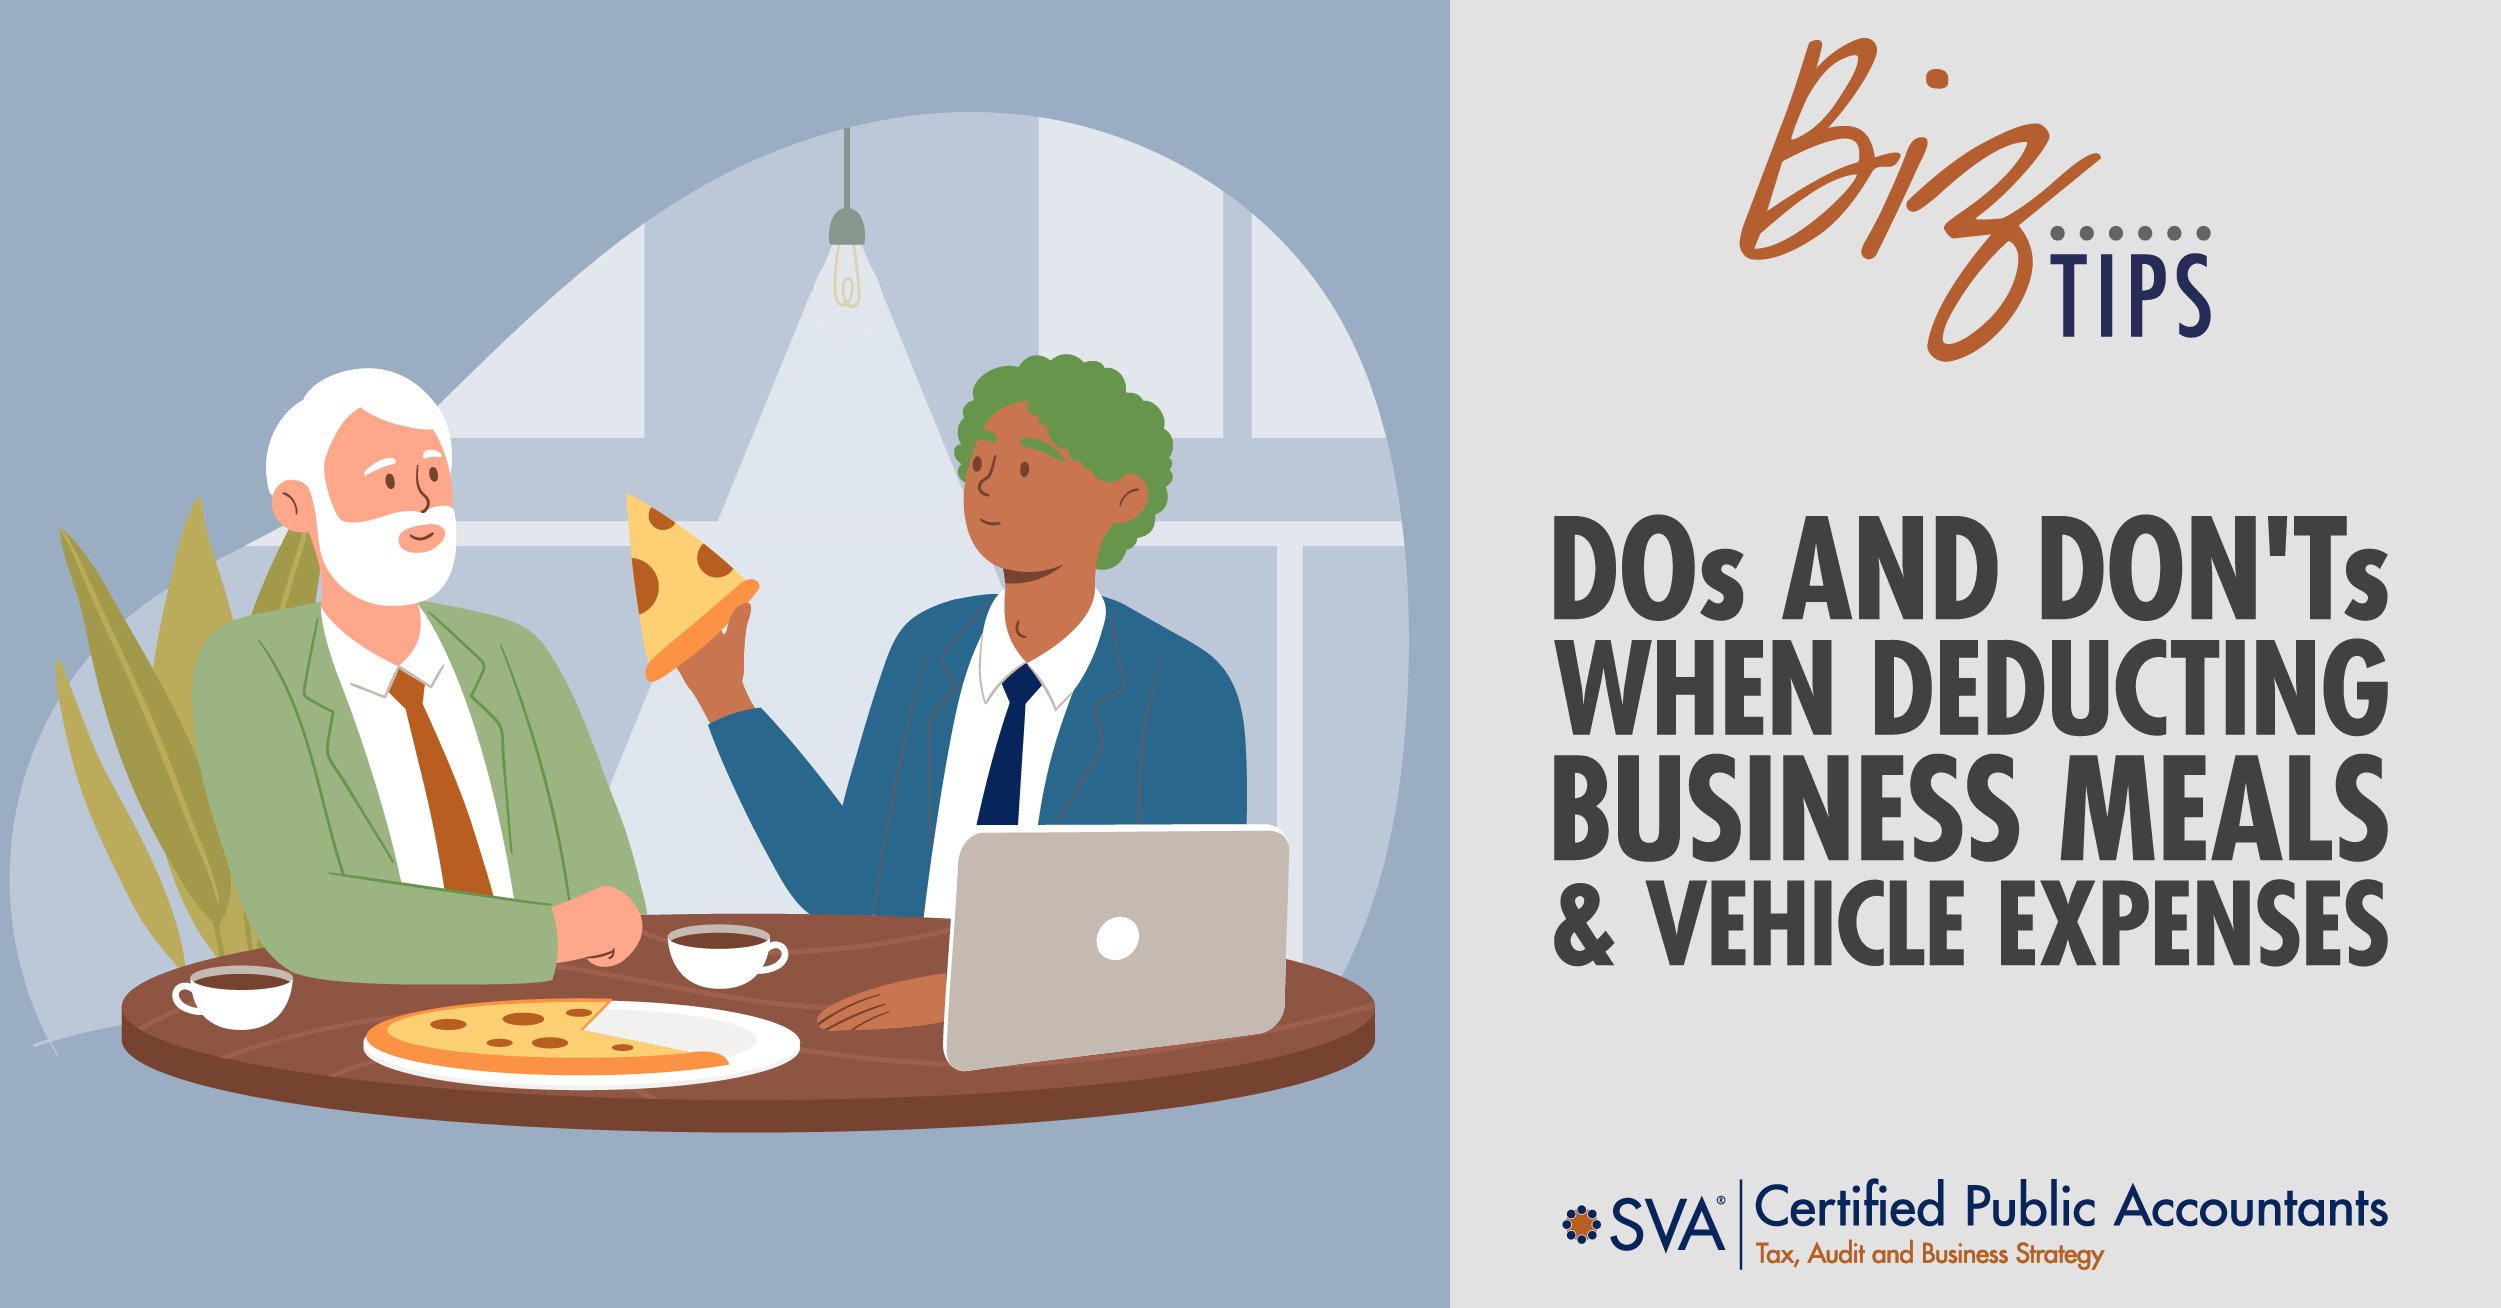 DOs and DON'Ts When Deducting Business Meals and Vehicle Expenses